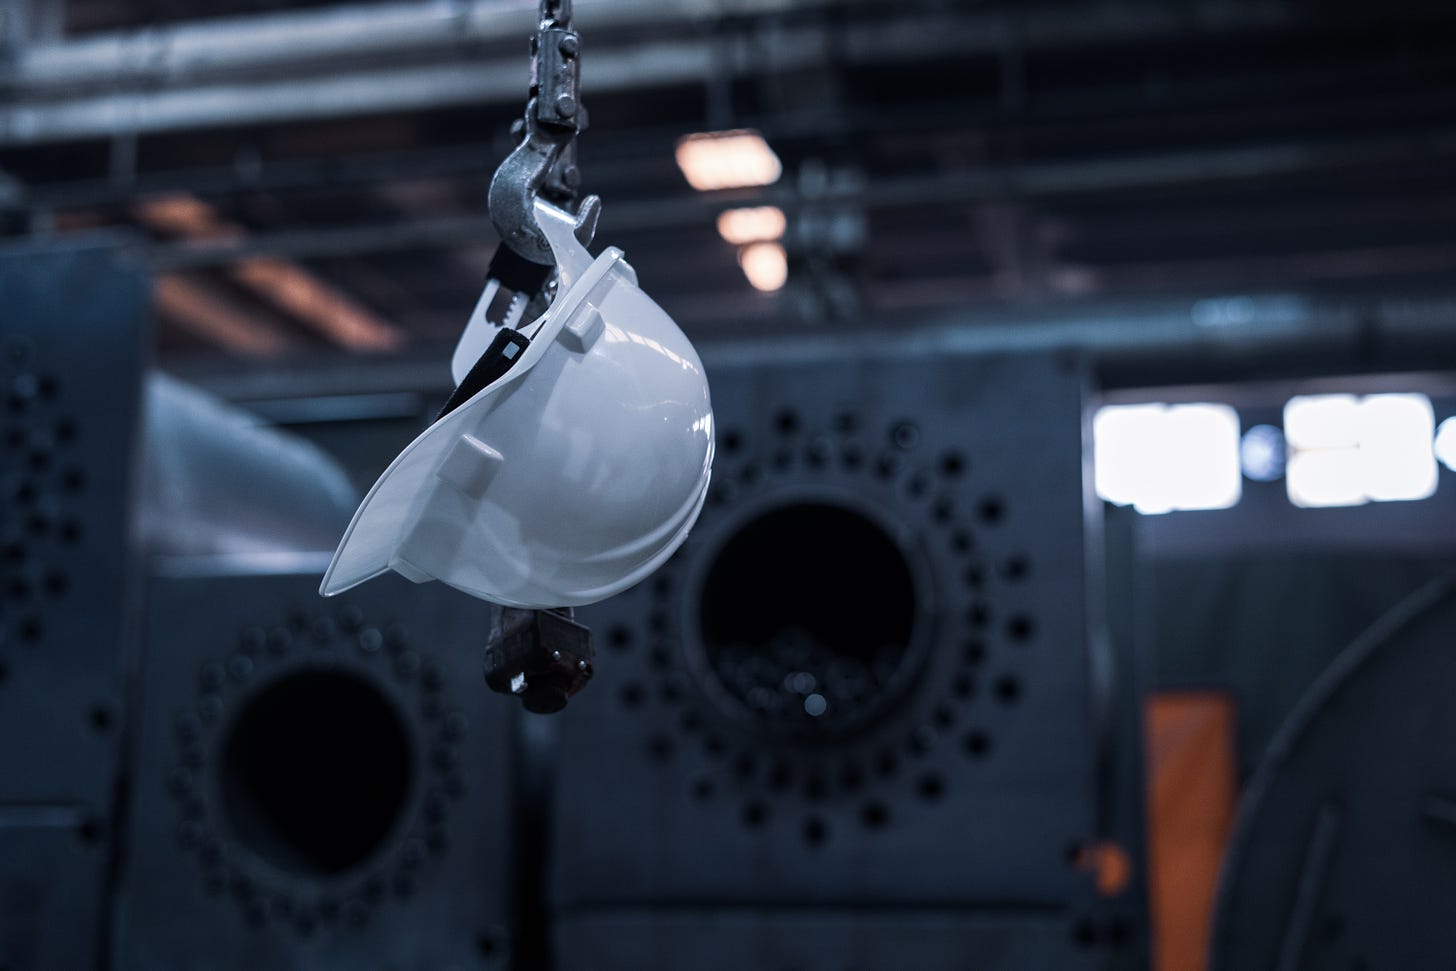 A white safety helmet hangs from a metal hooks, with industrial equipment out-of-focus in the background